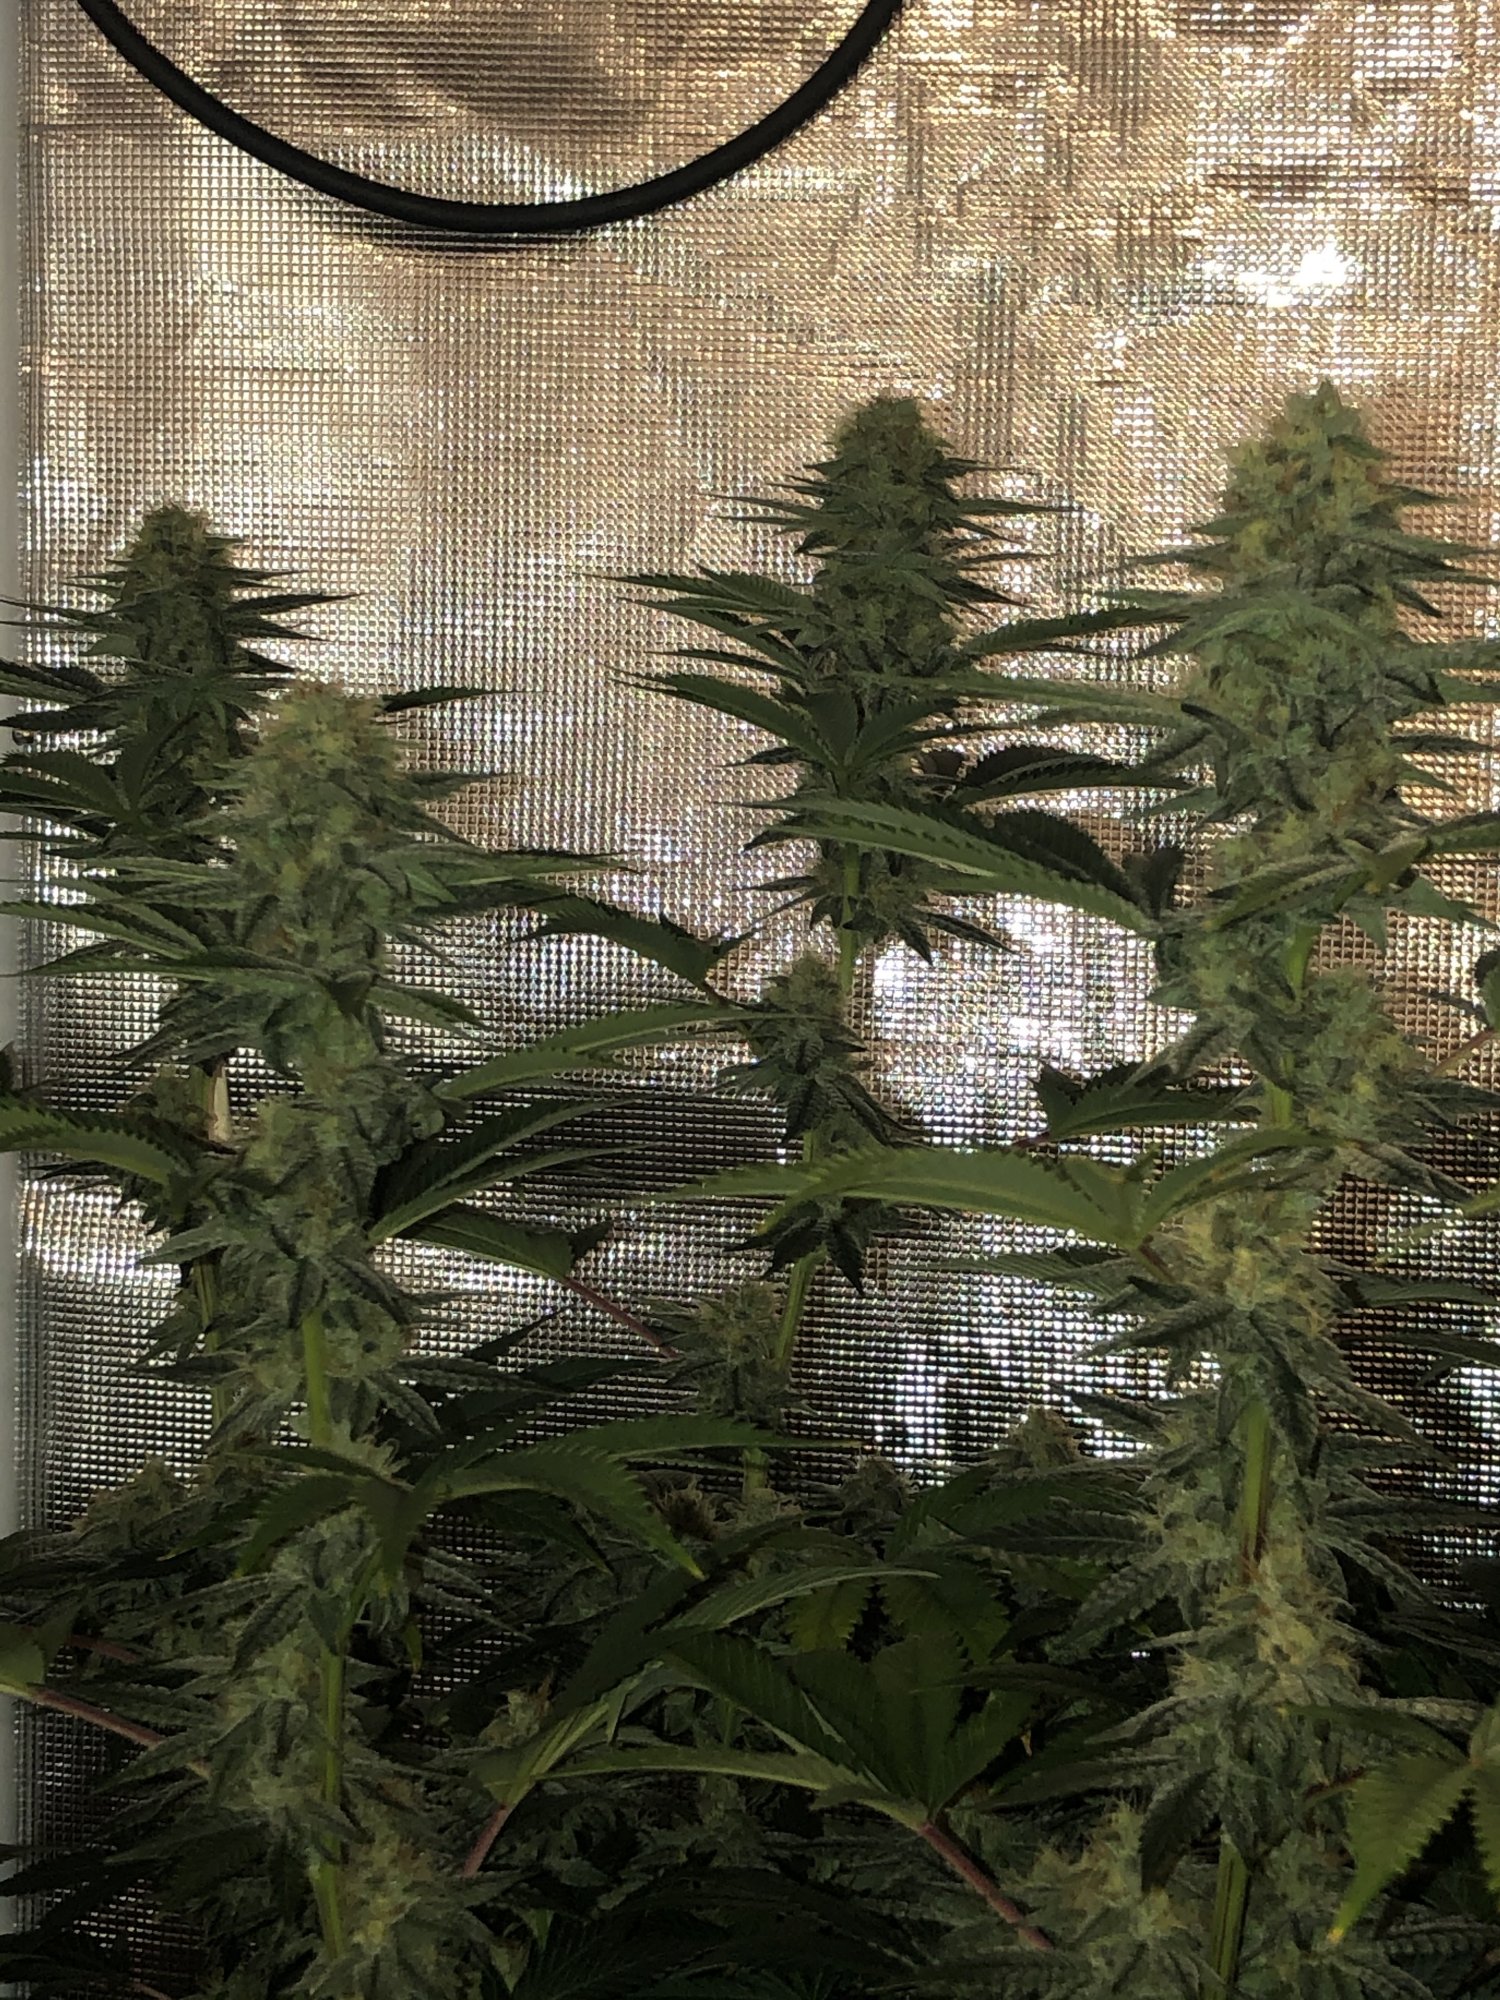 East coast sour diesel grow week 5 of flower   questions for those familiar with this strain 3